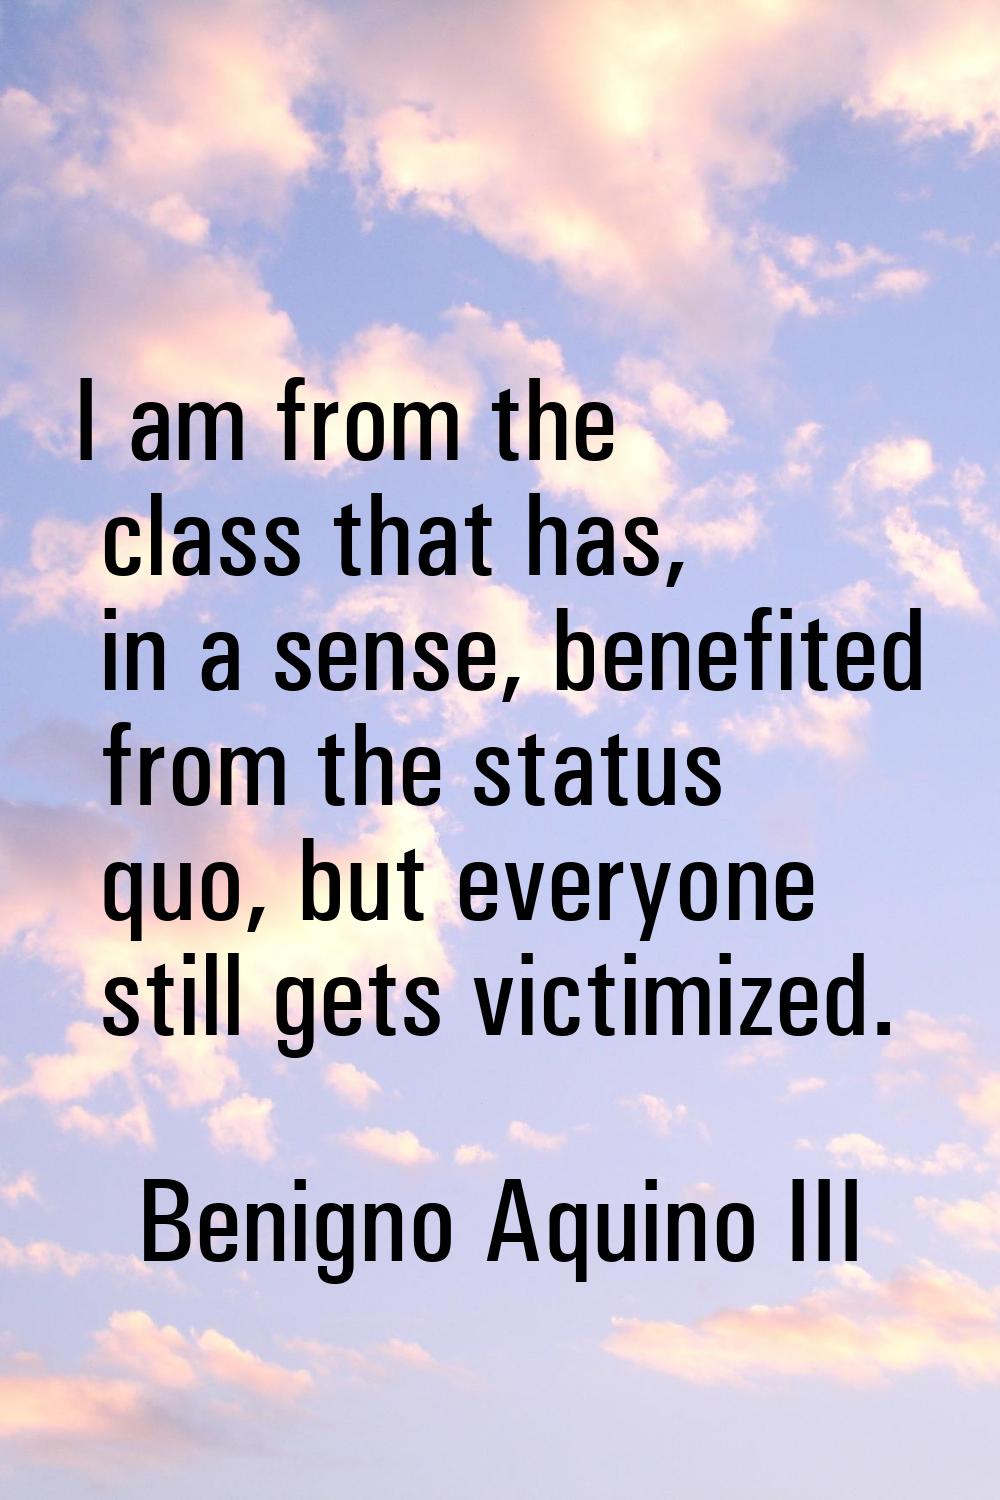 I am from the class that has, in a sense, benefited from the status quo, but everyone still gets vi